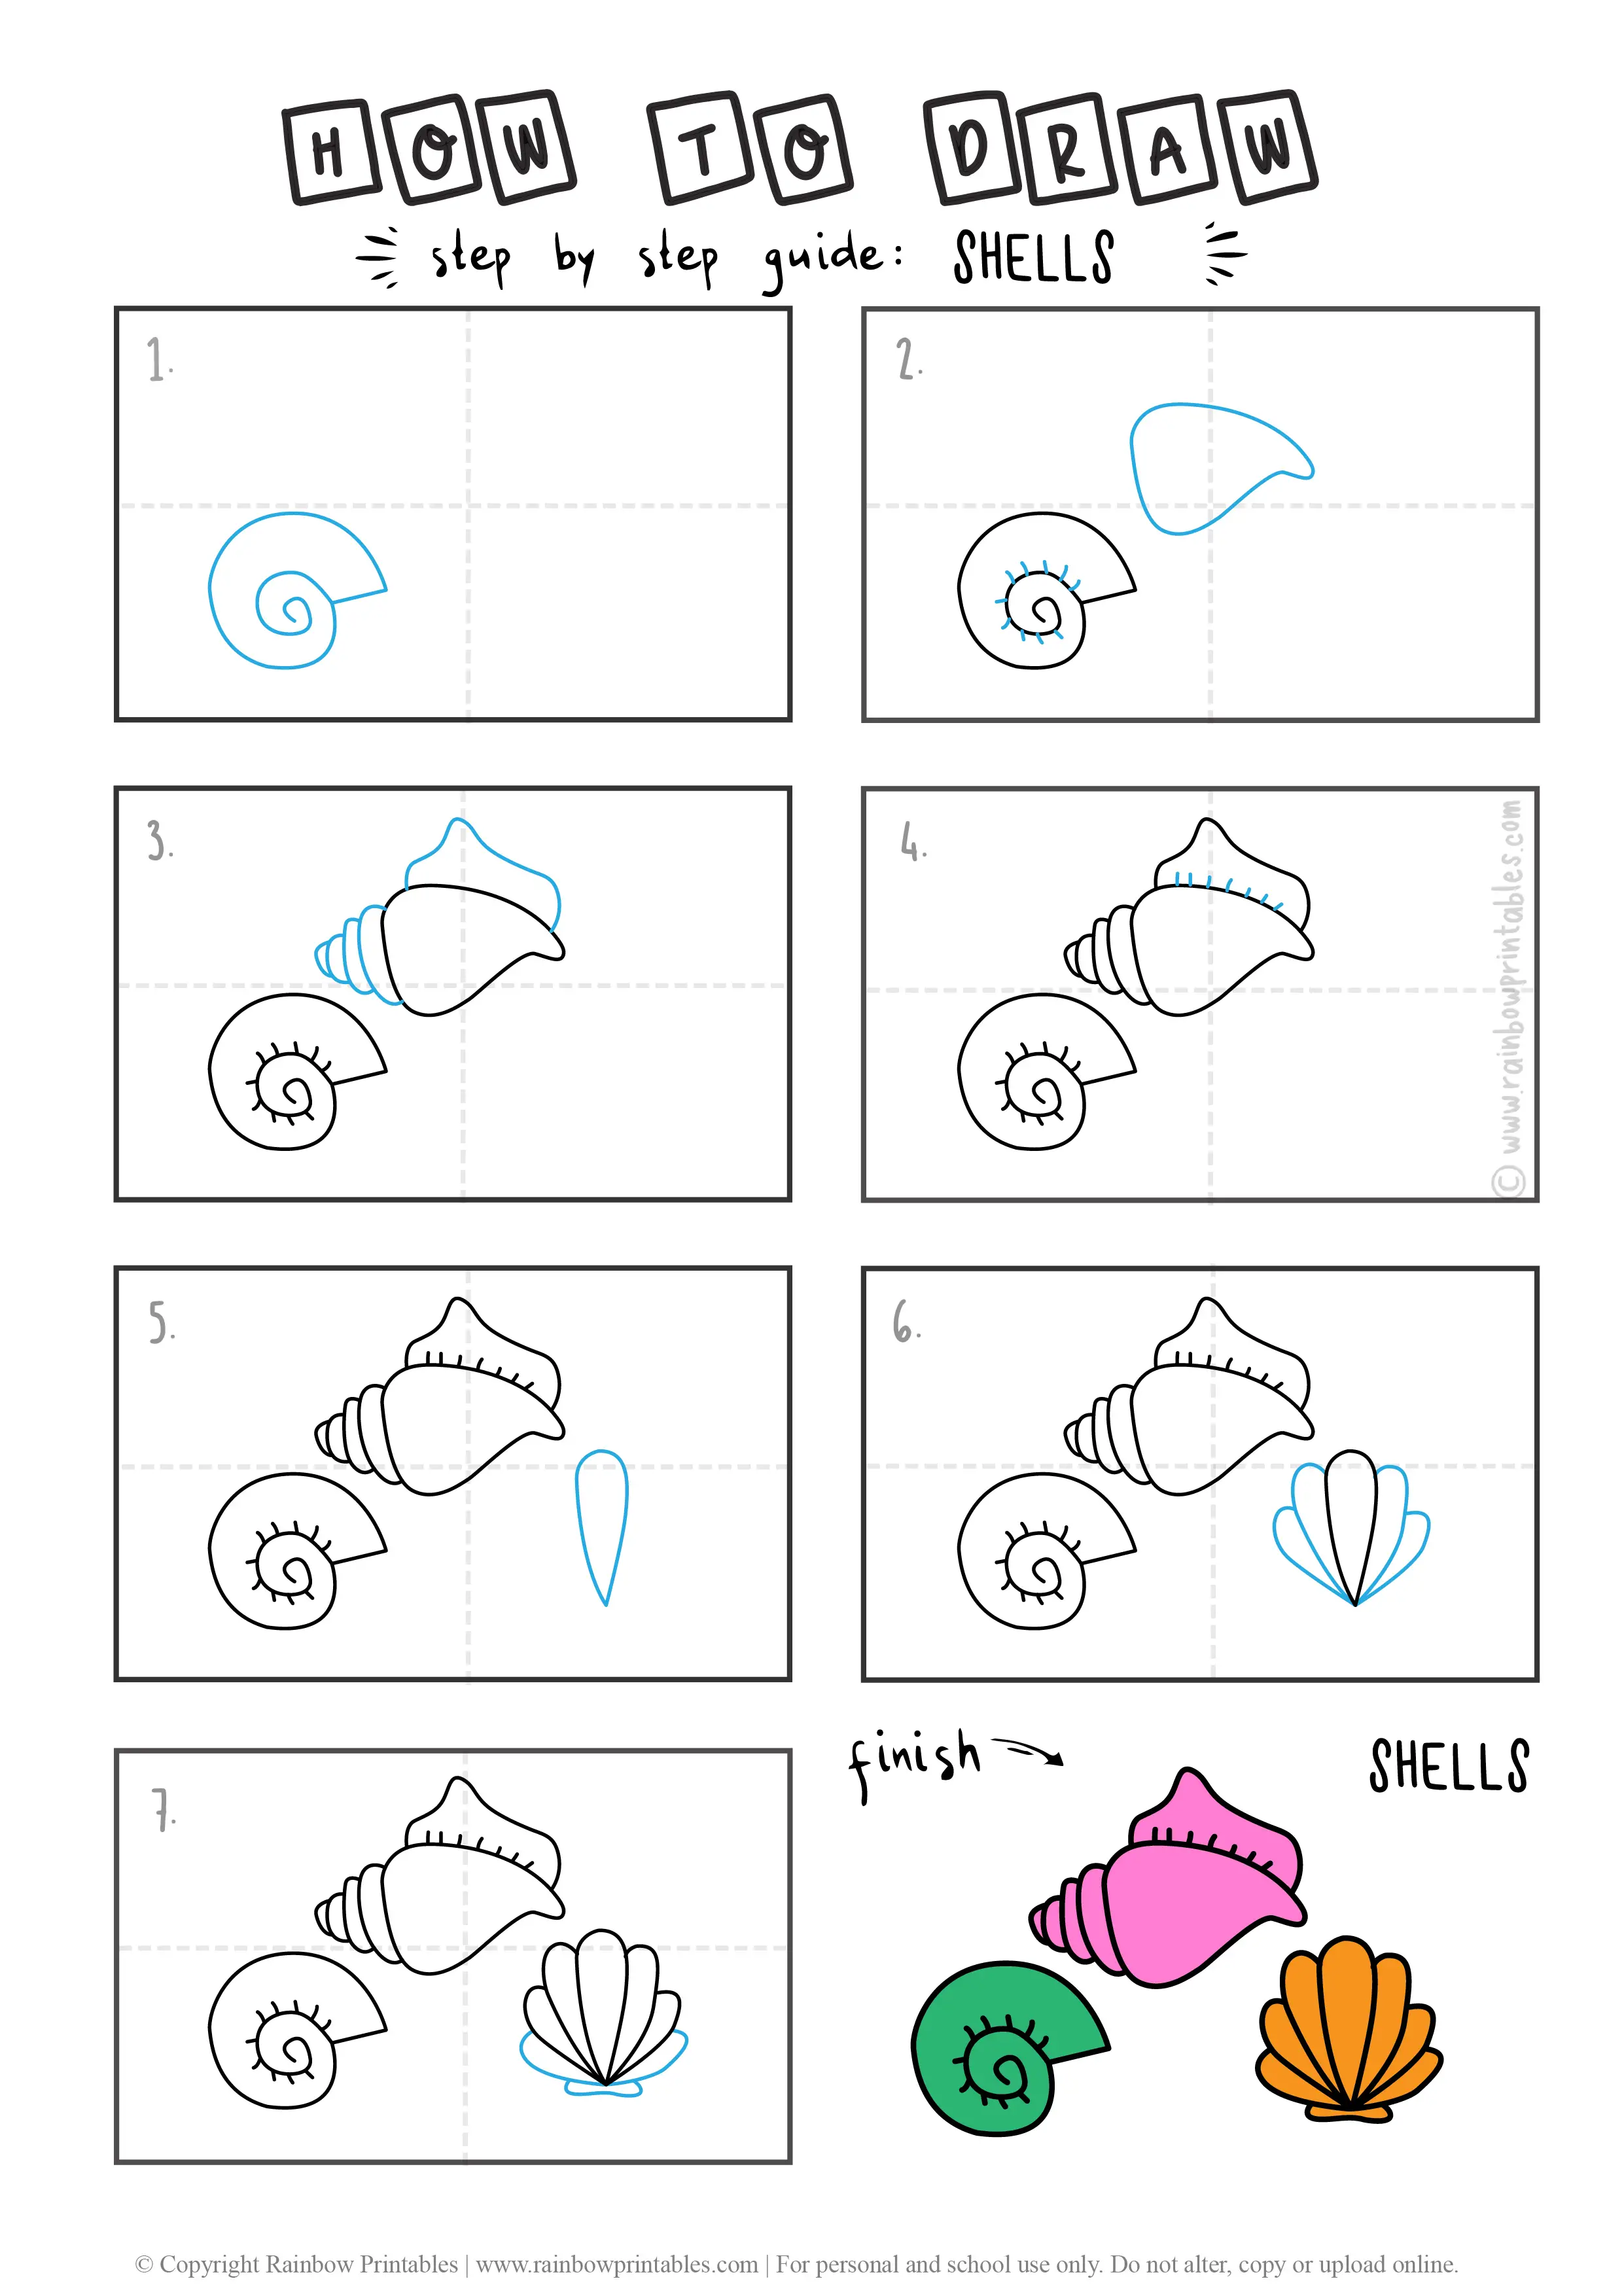 HOW TO DRAW PRETTY SEASHELLS BEACH SHELLS CLAMS CONCH GUIDE ILLUSTRATION STEP BY STEP EASY SIMPLE FOR KIDS